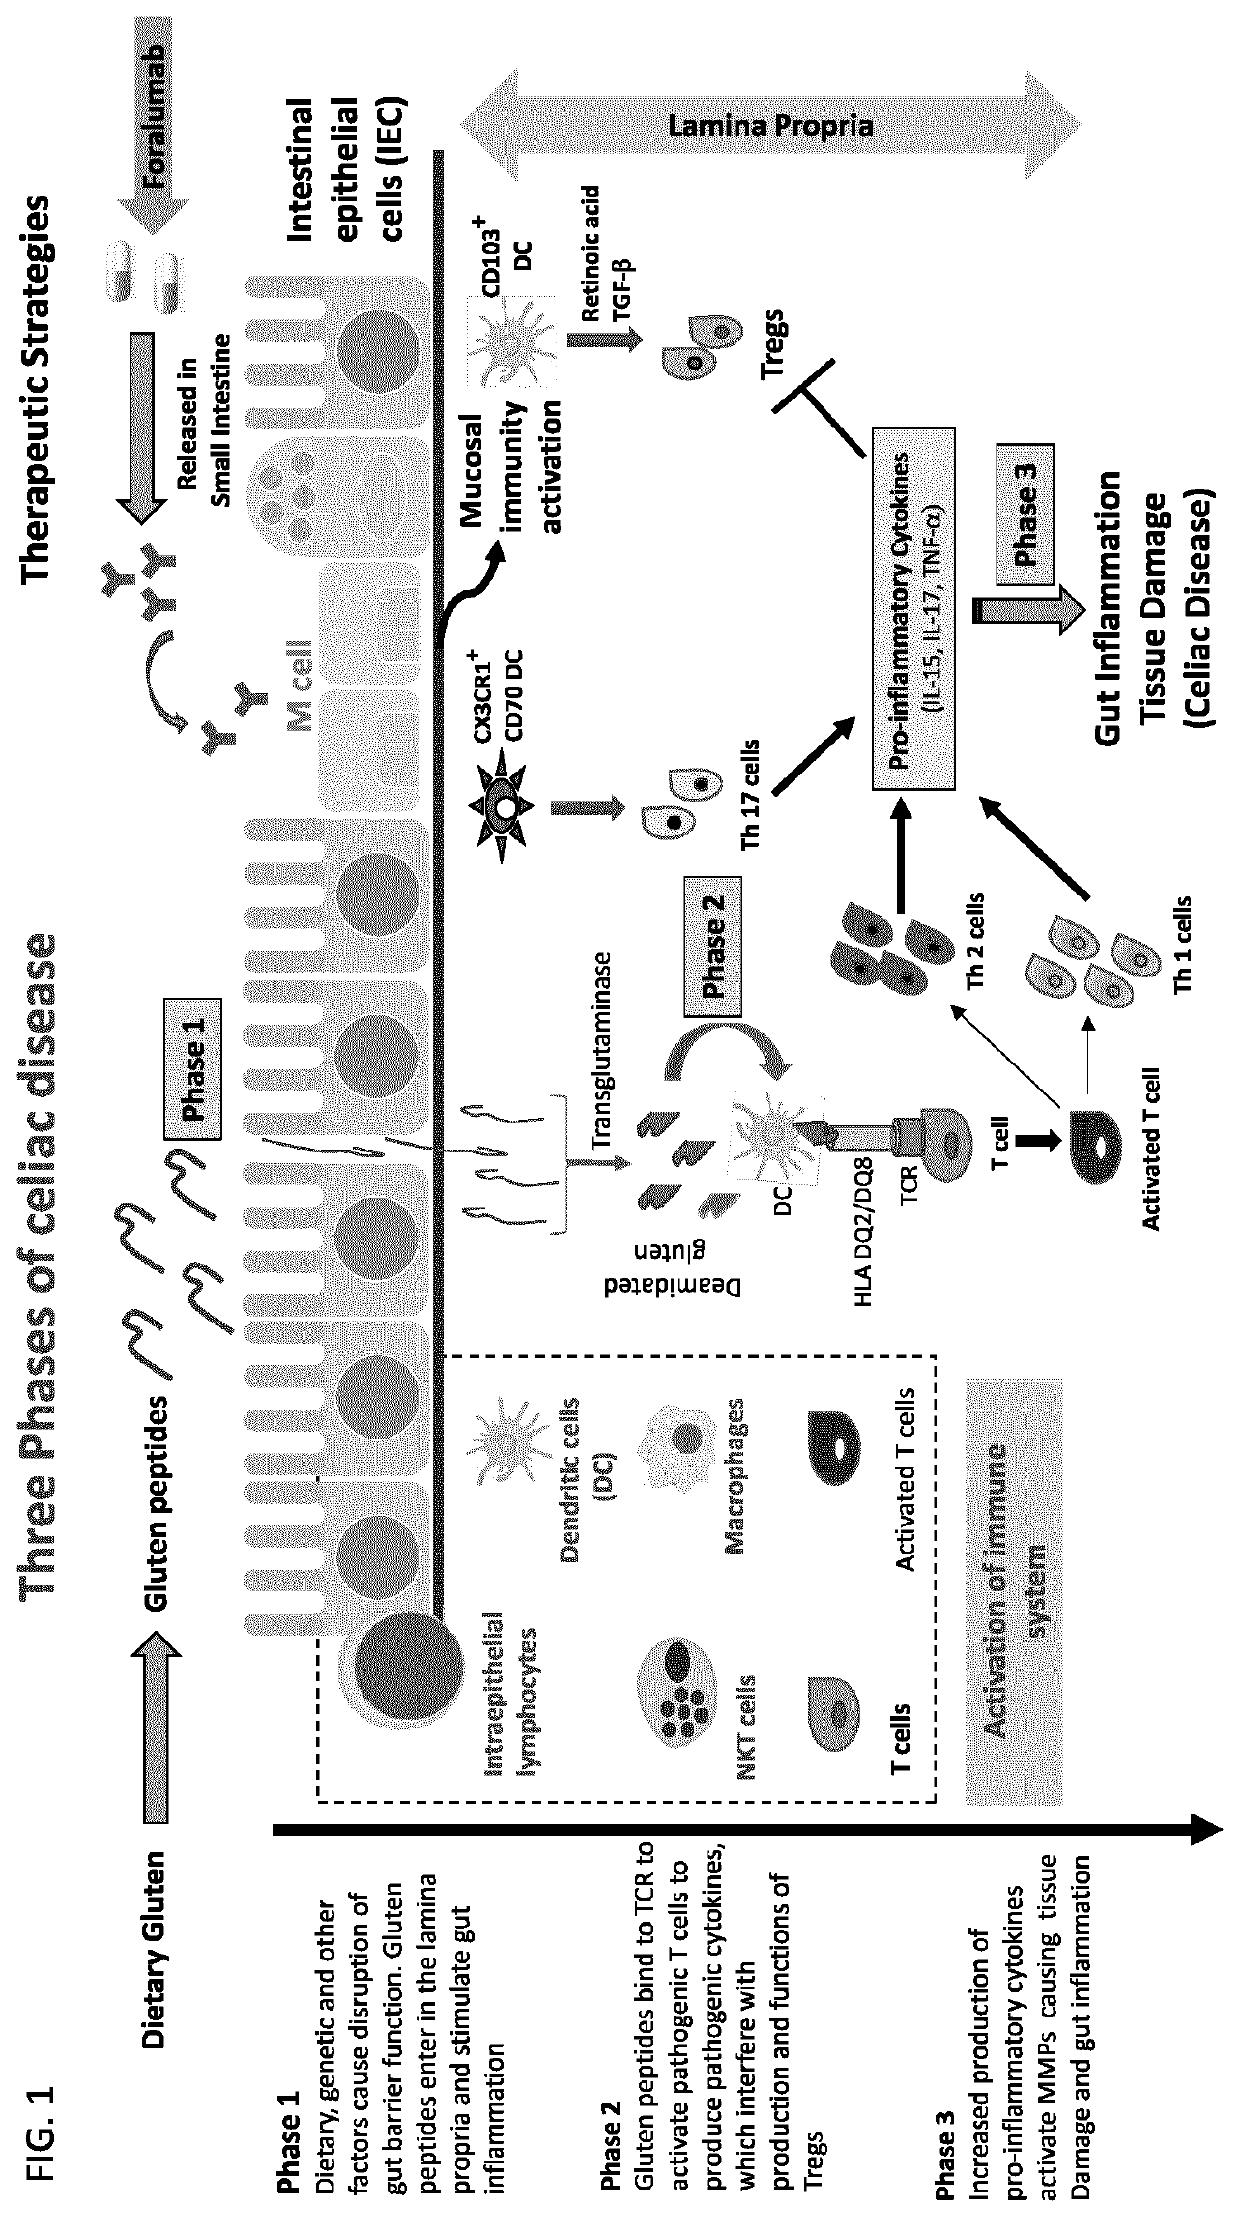 Composition and methods of treating inflammatory and autoimmune diseases